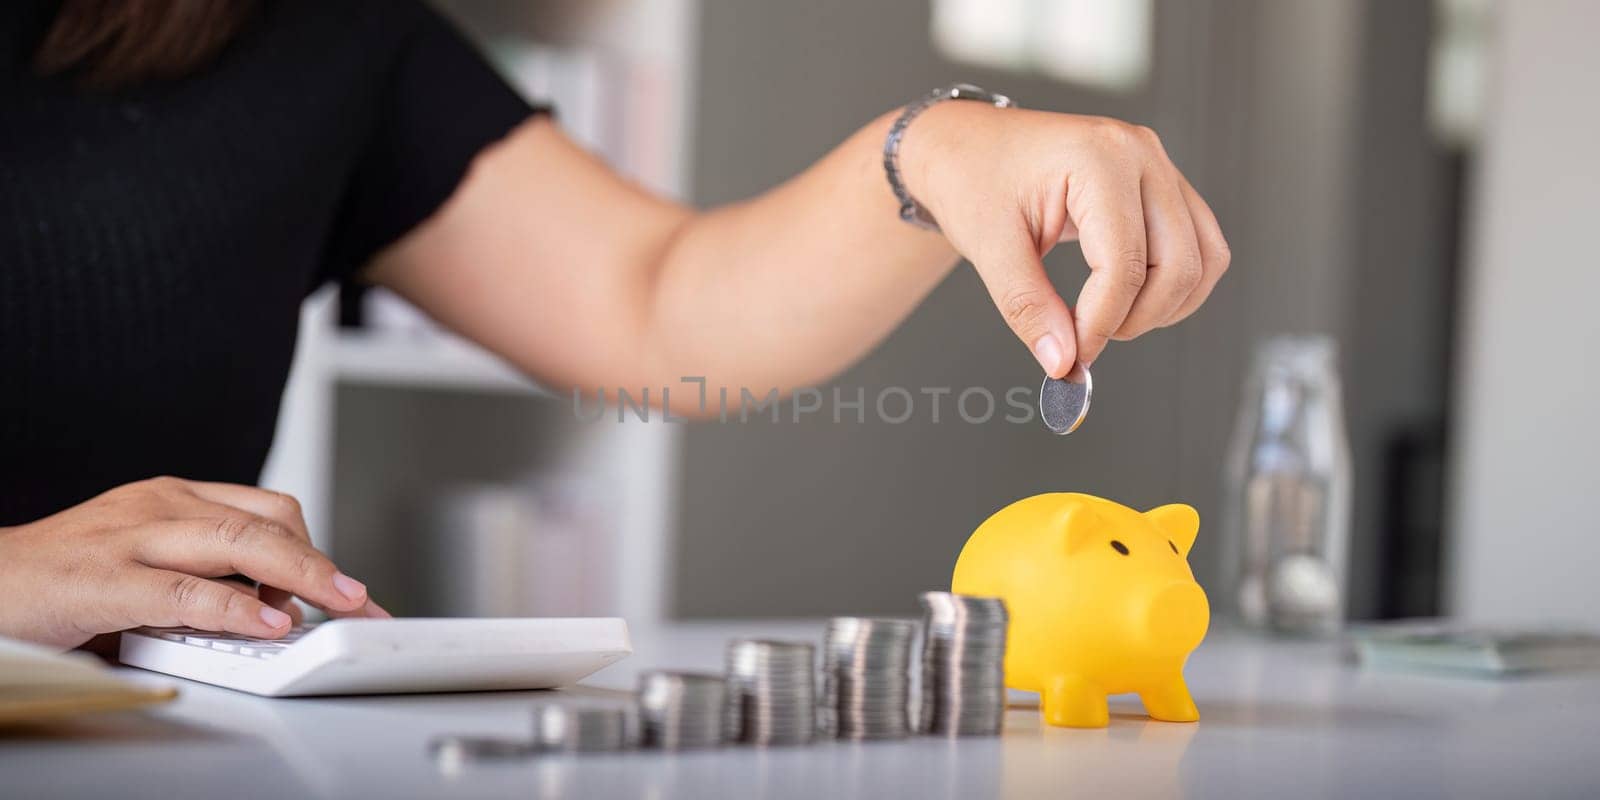 Woman hand putting coins in a piggy bank for save money and saving money concept by nateemee